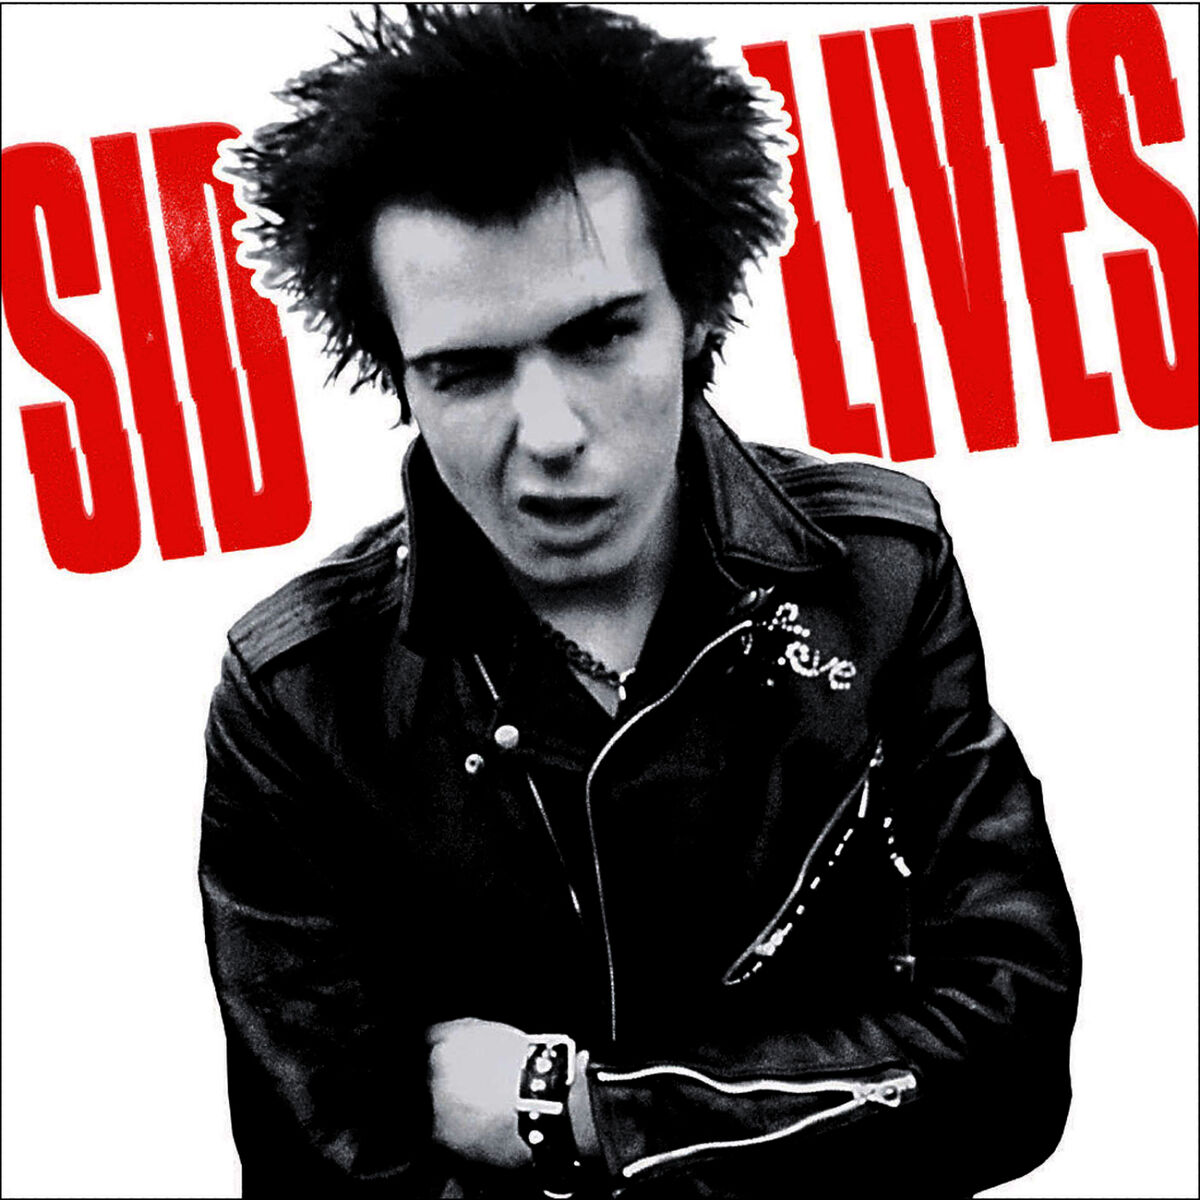 Sid Vicious: albums, songs, playlists | Listen on Deezer